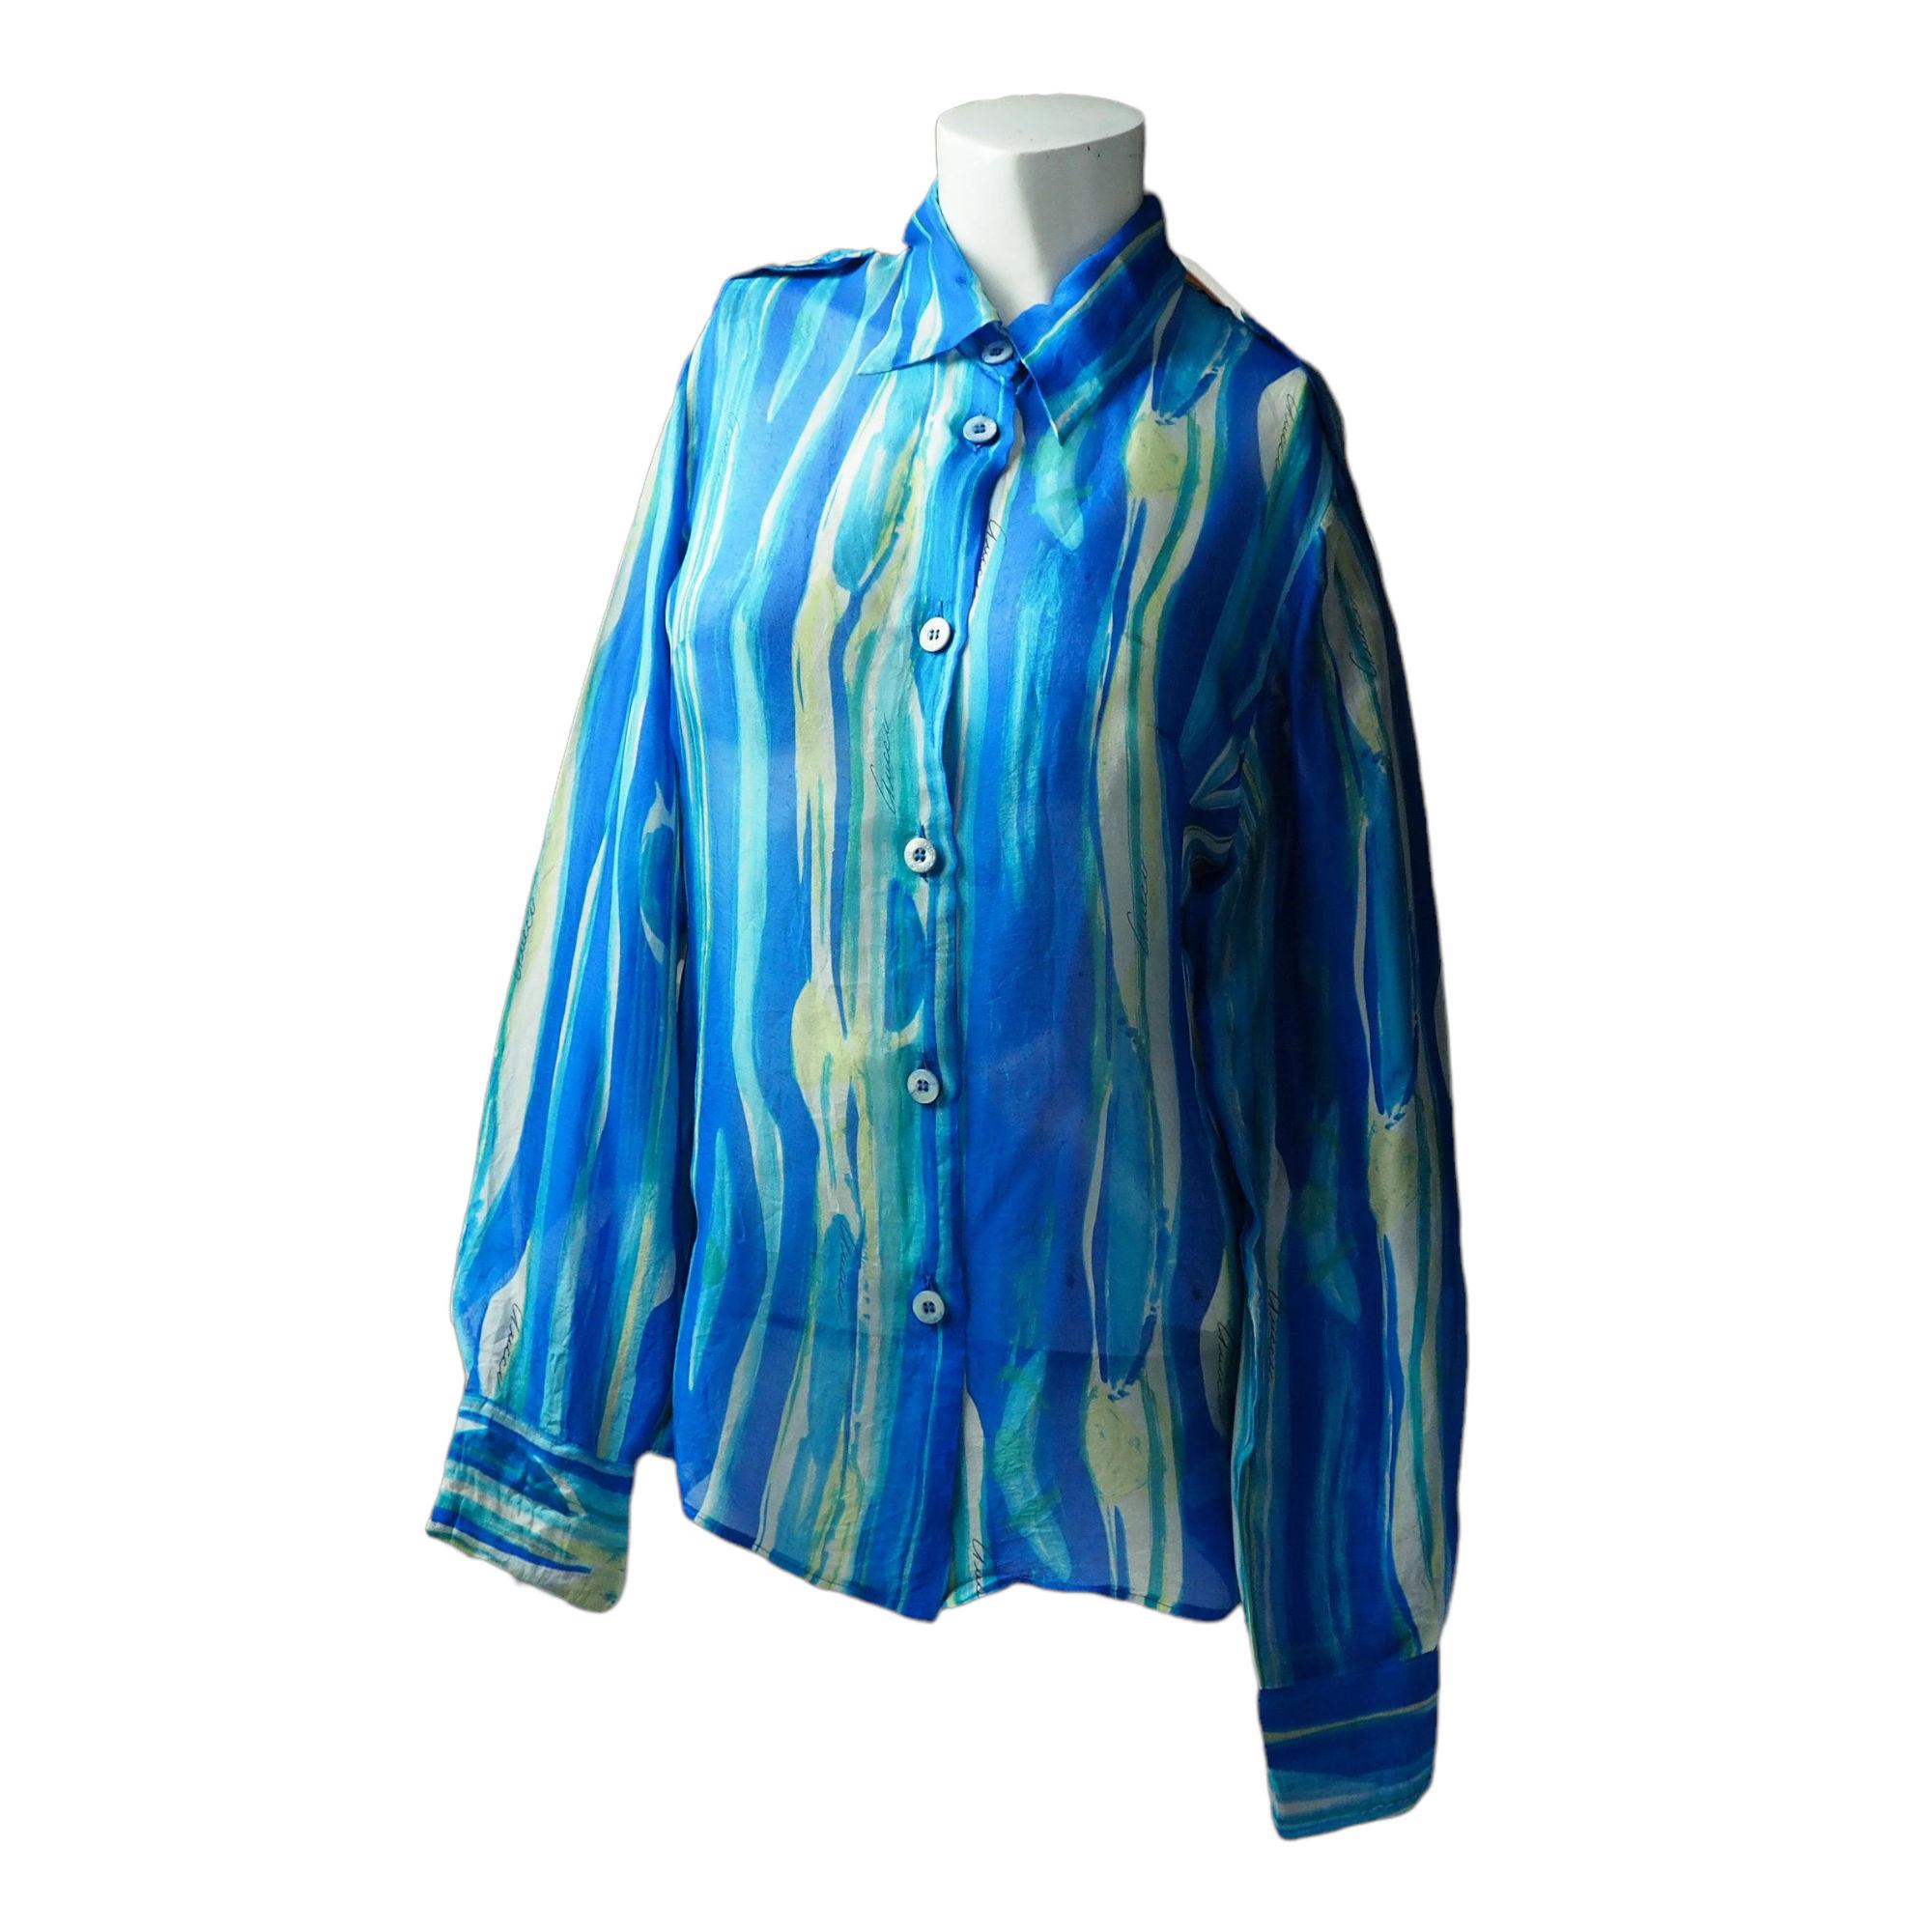 GUCCI S/S 1996 by Tom Ford Abstract Colour Printed Silk Sheer Shirt For Sale 11